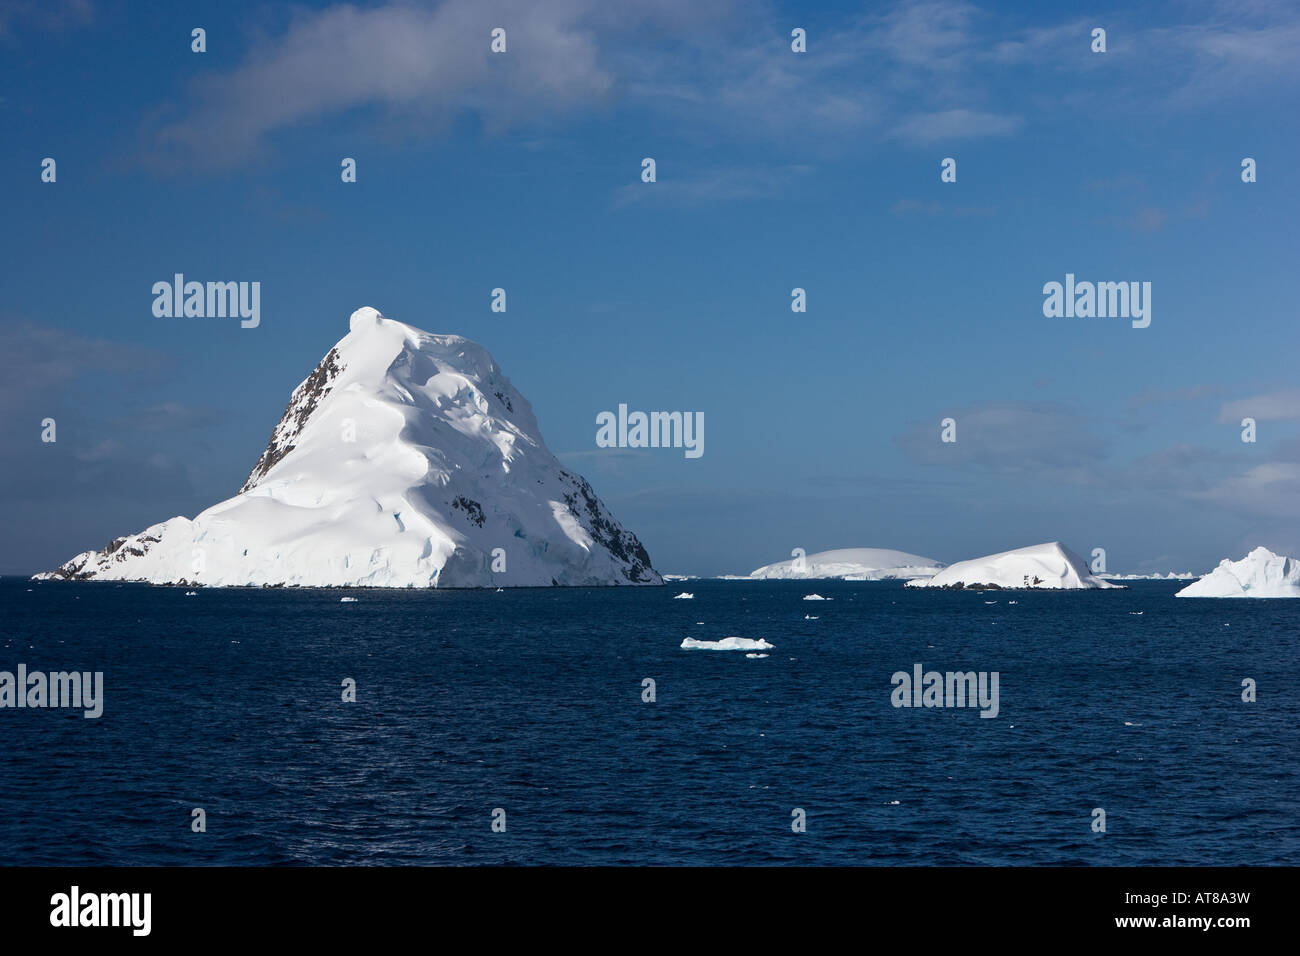 Snow capped islands of the Antarctic peninsula surrounded by icebergs and sea against a blue sky background Stock Photo